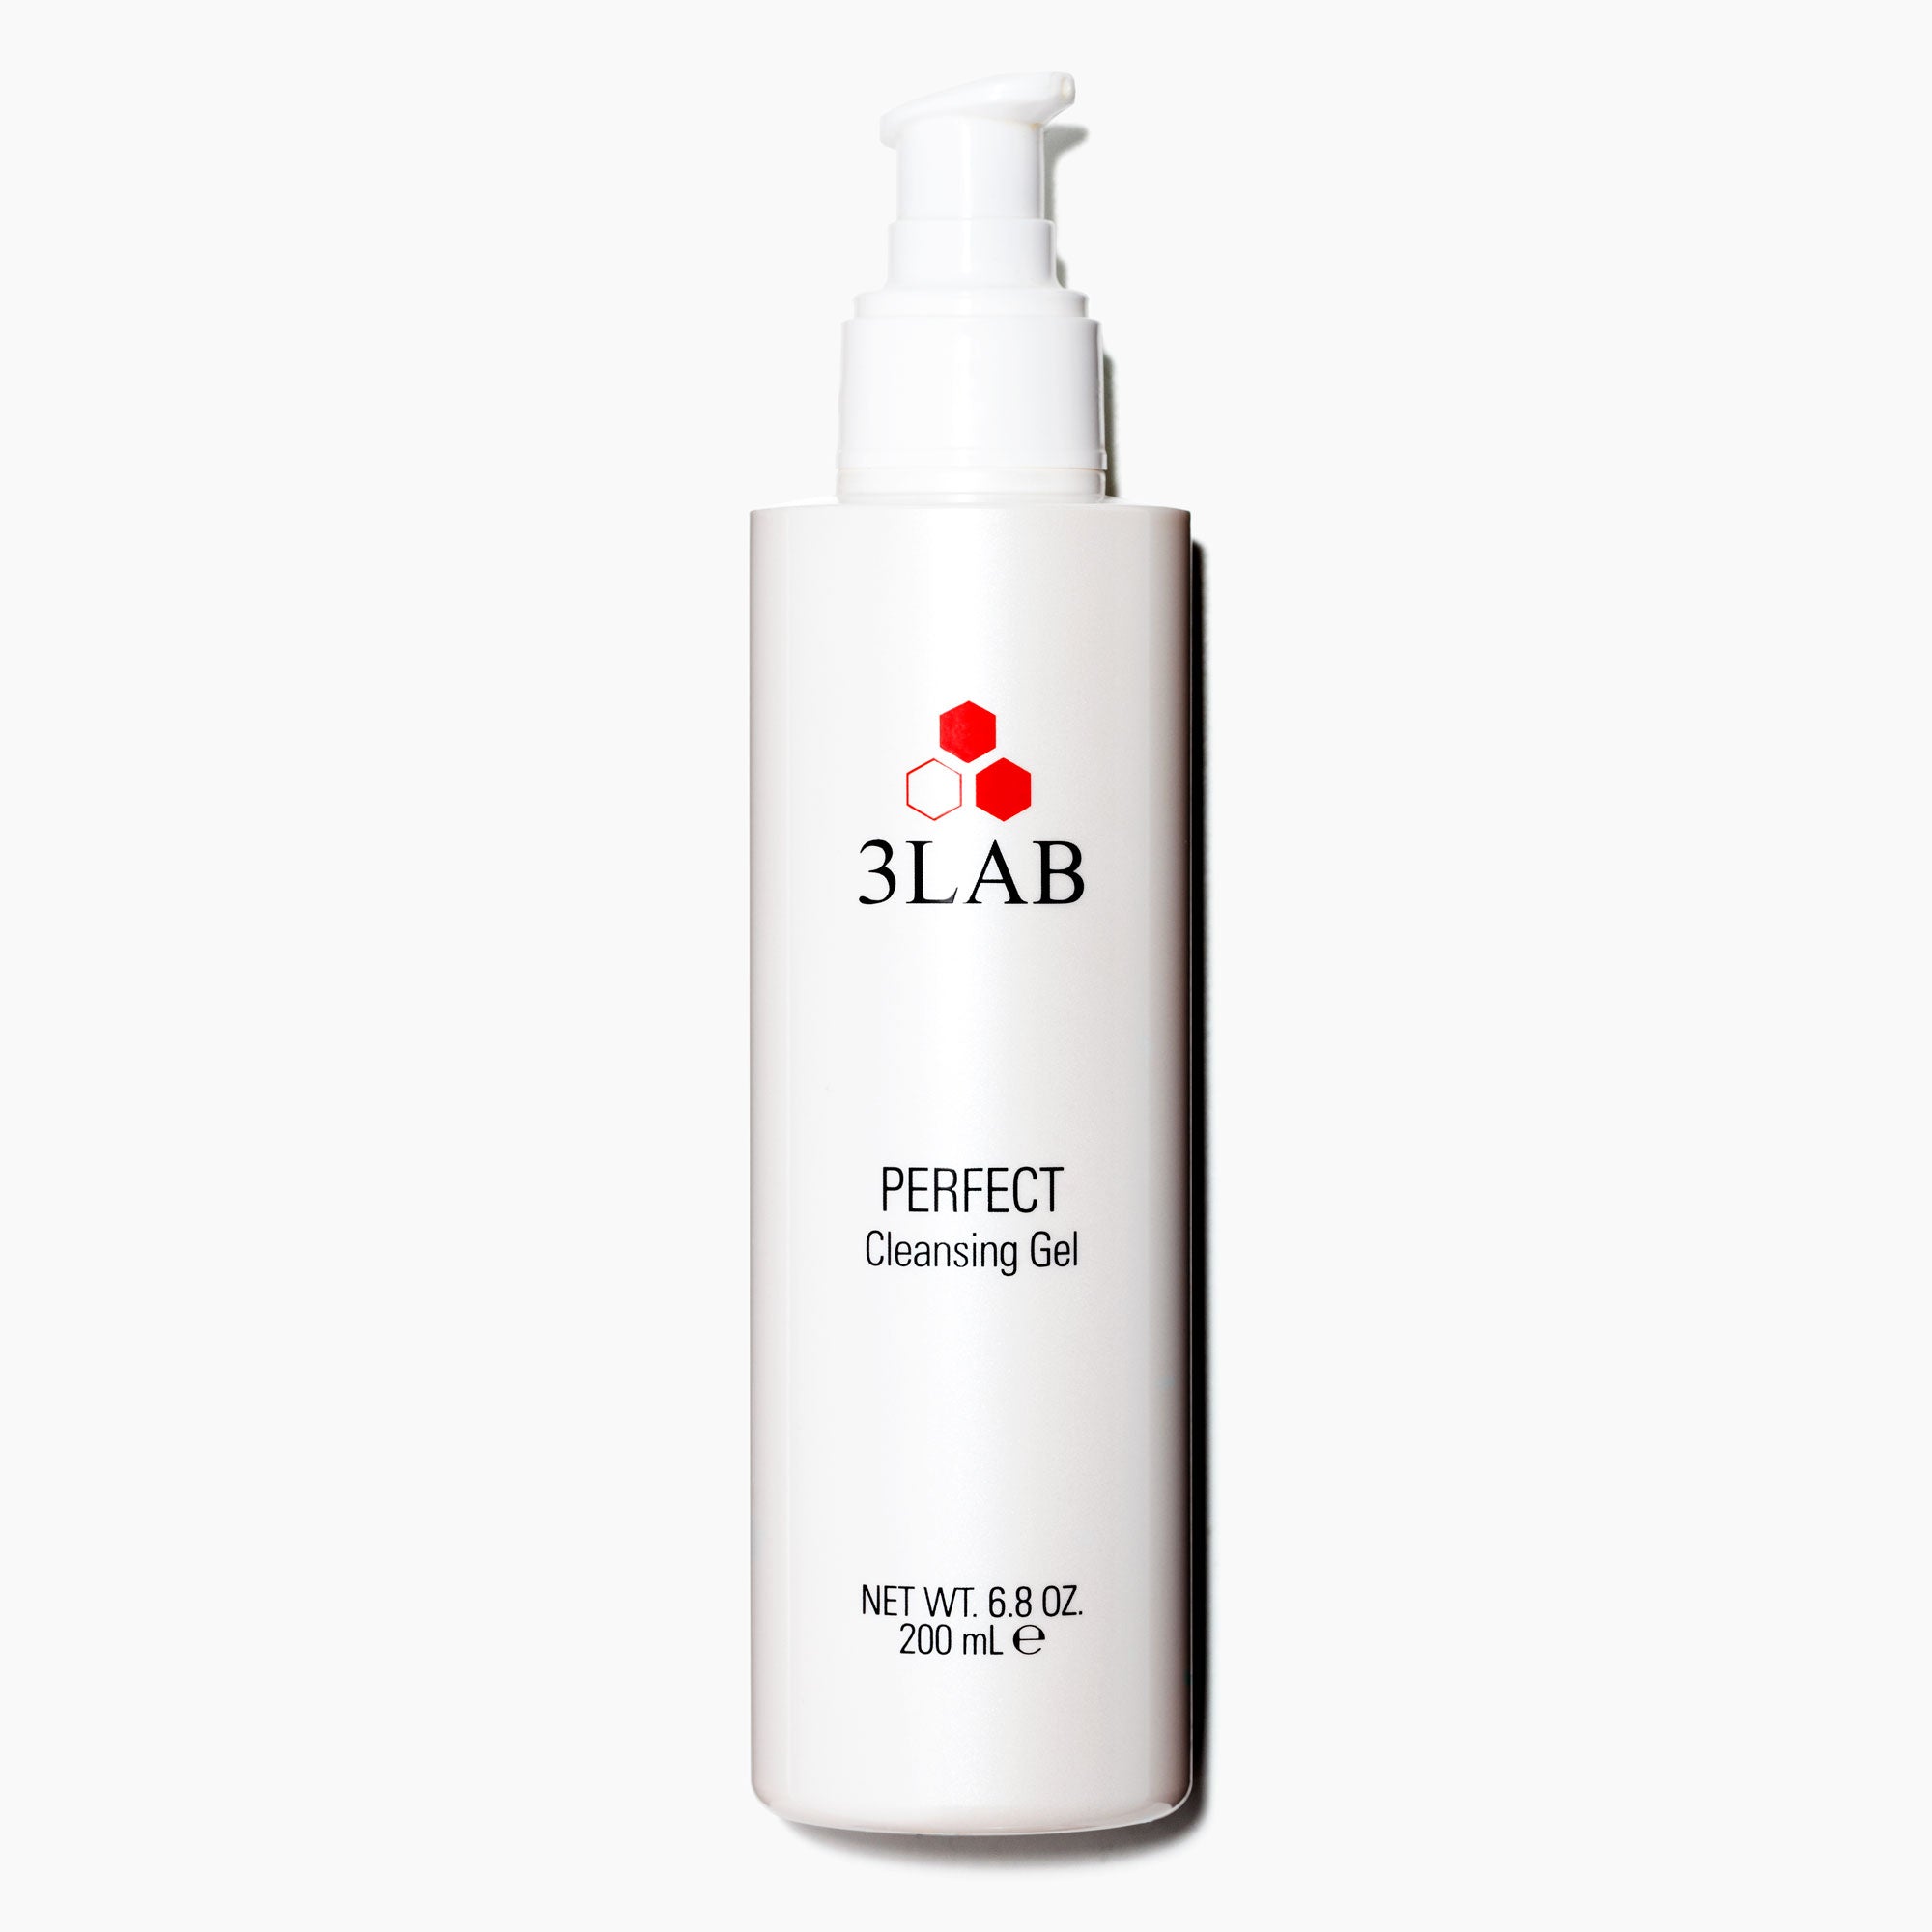 PERFECT Cleansing Gel